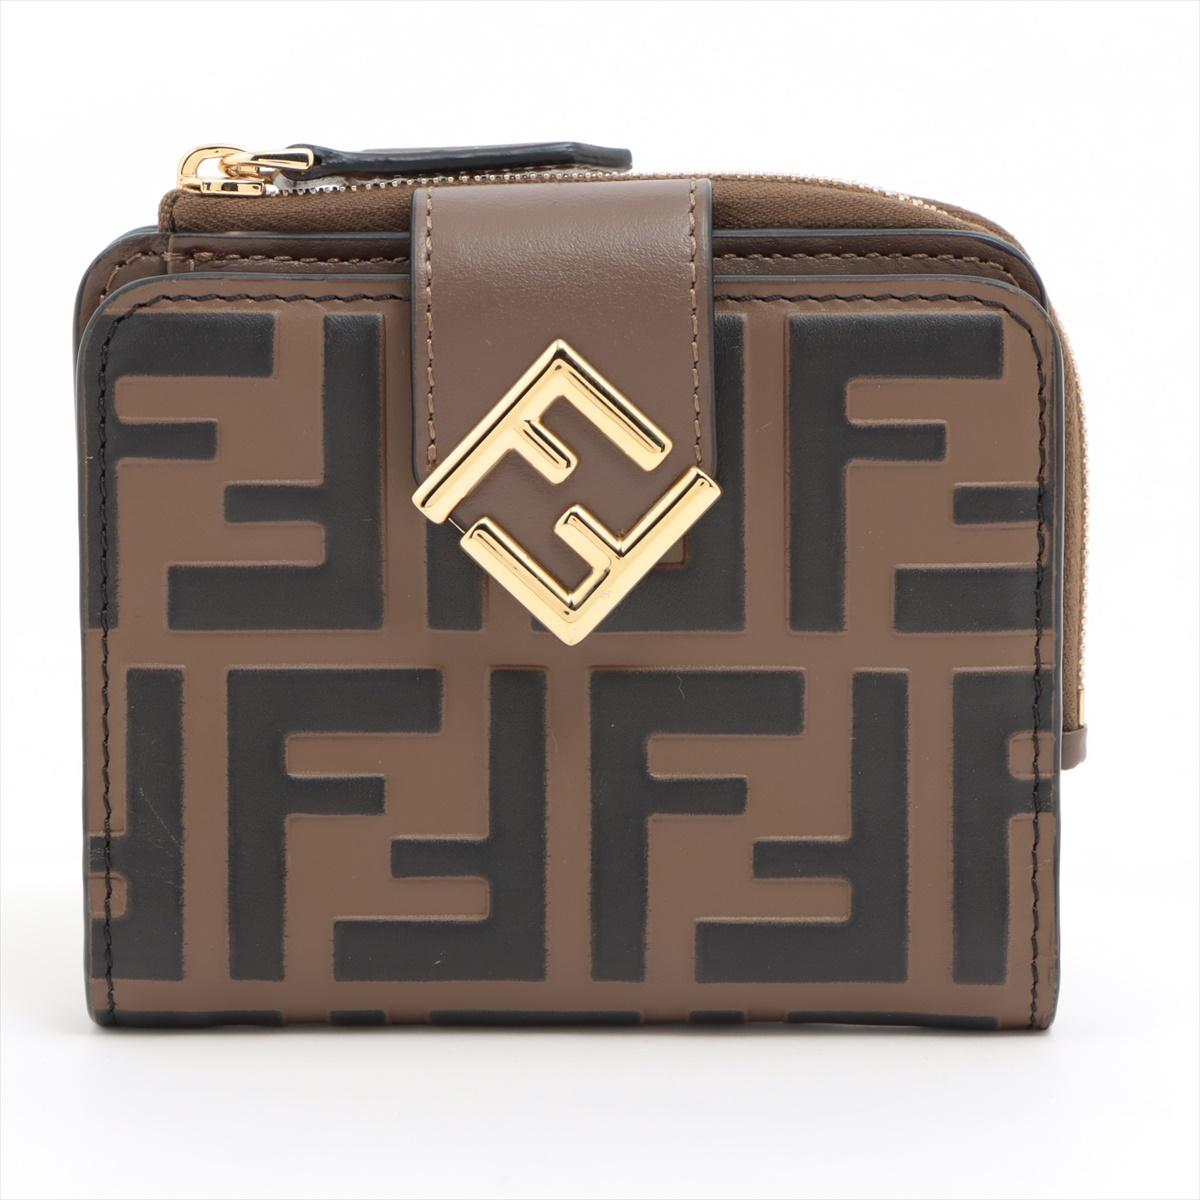 The Fendi FF Interlocking Logo Leather Wallet in Brown is a sophisticated accessory that exudes luxury and style. Crafted from high-quality leather, the wallet features Fendi's iconic FF interlocking logo pattern embossed on the exterior, showcasing